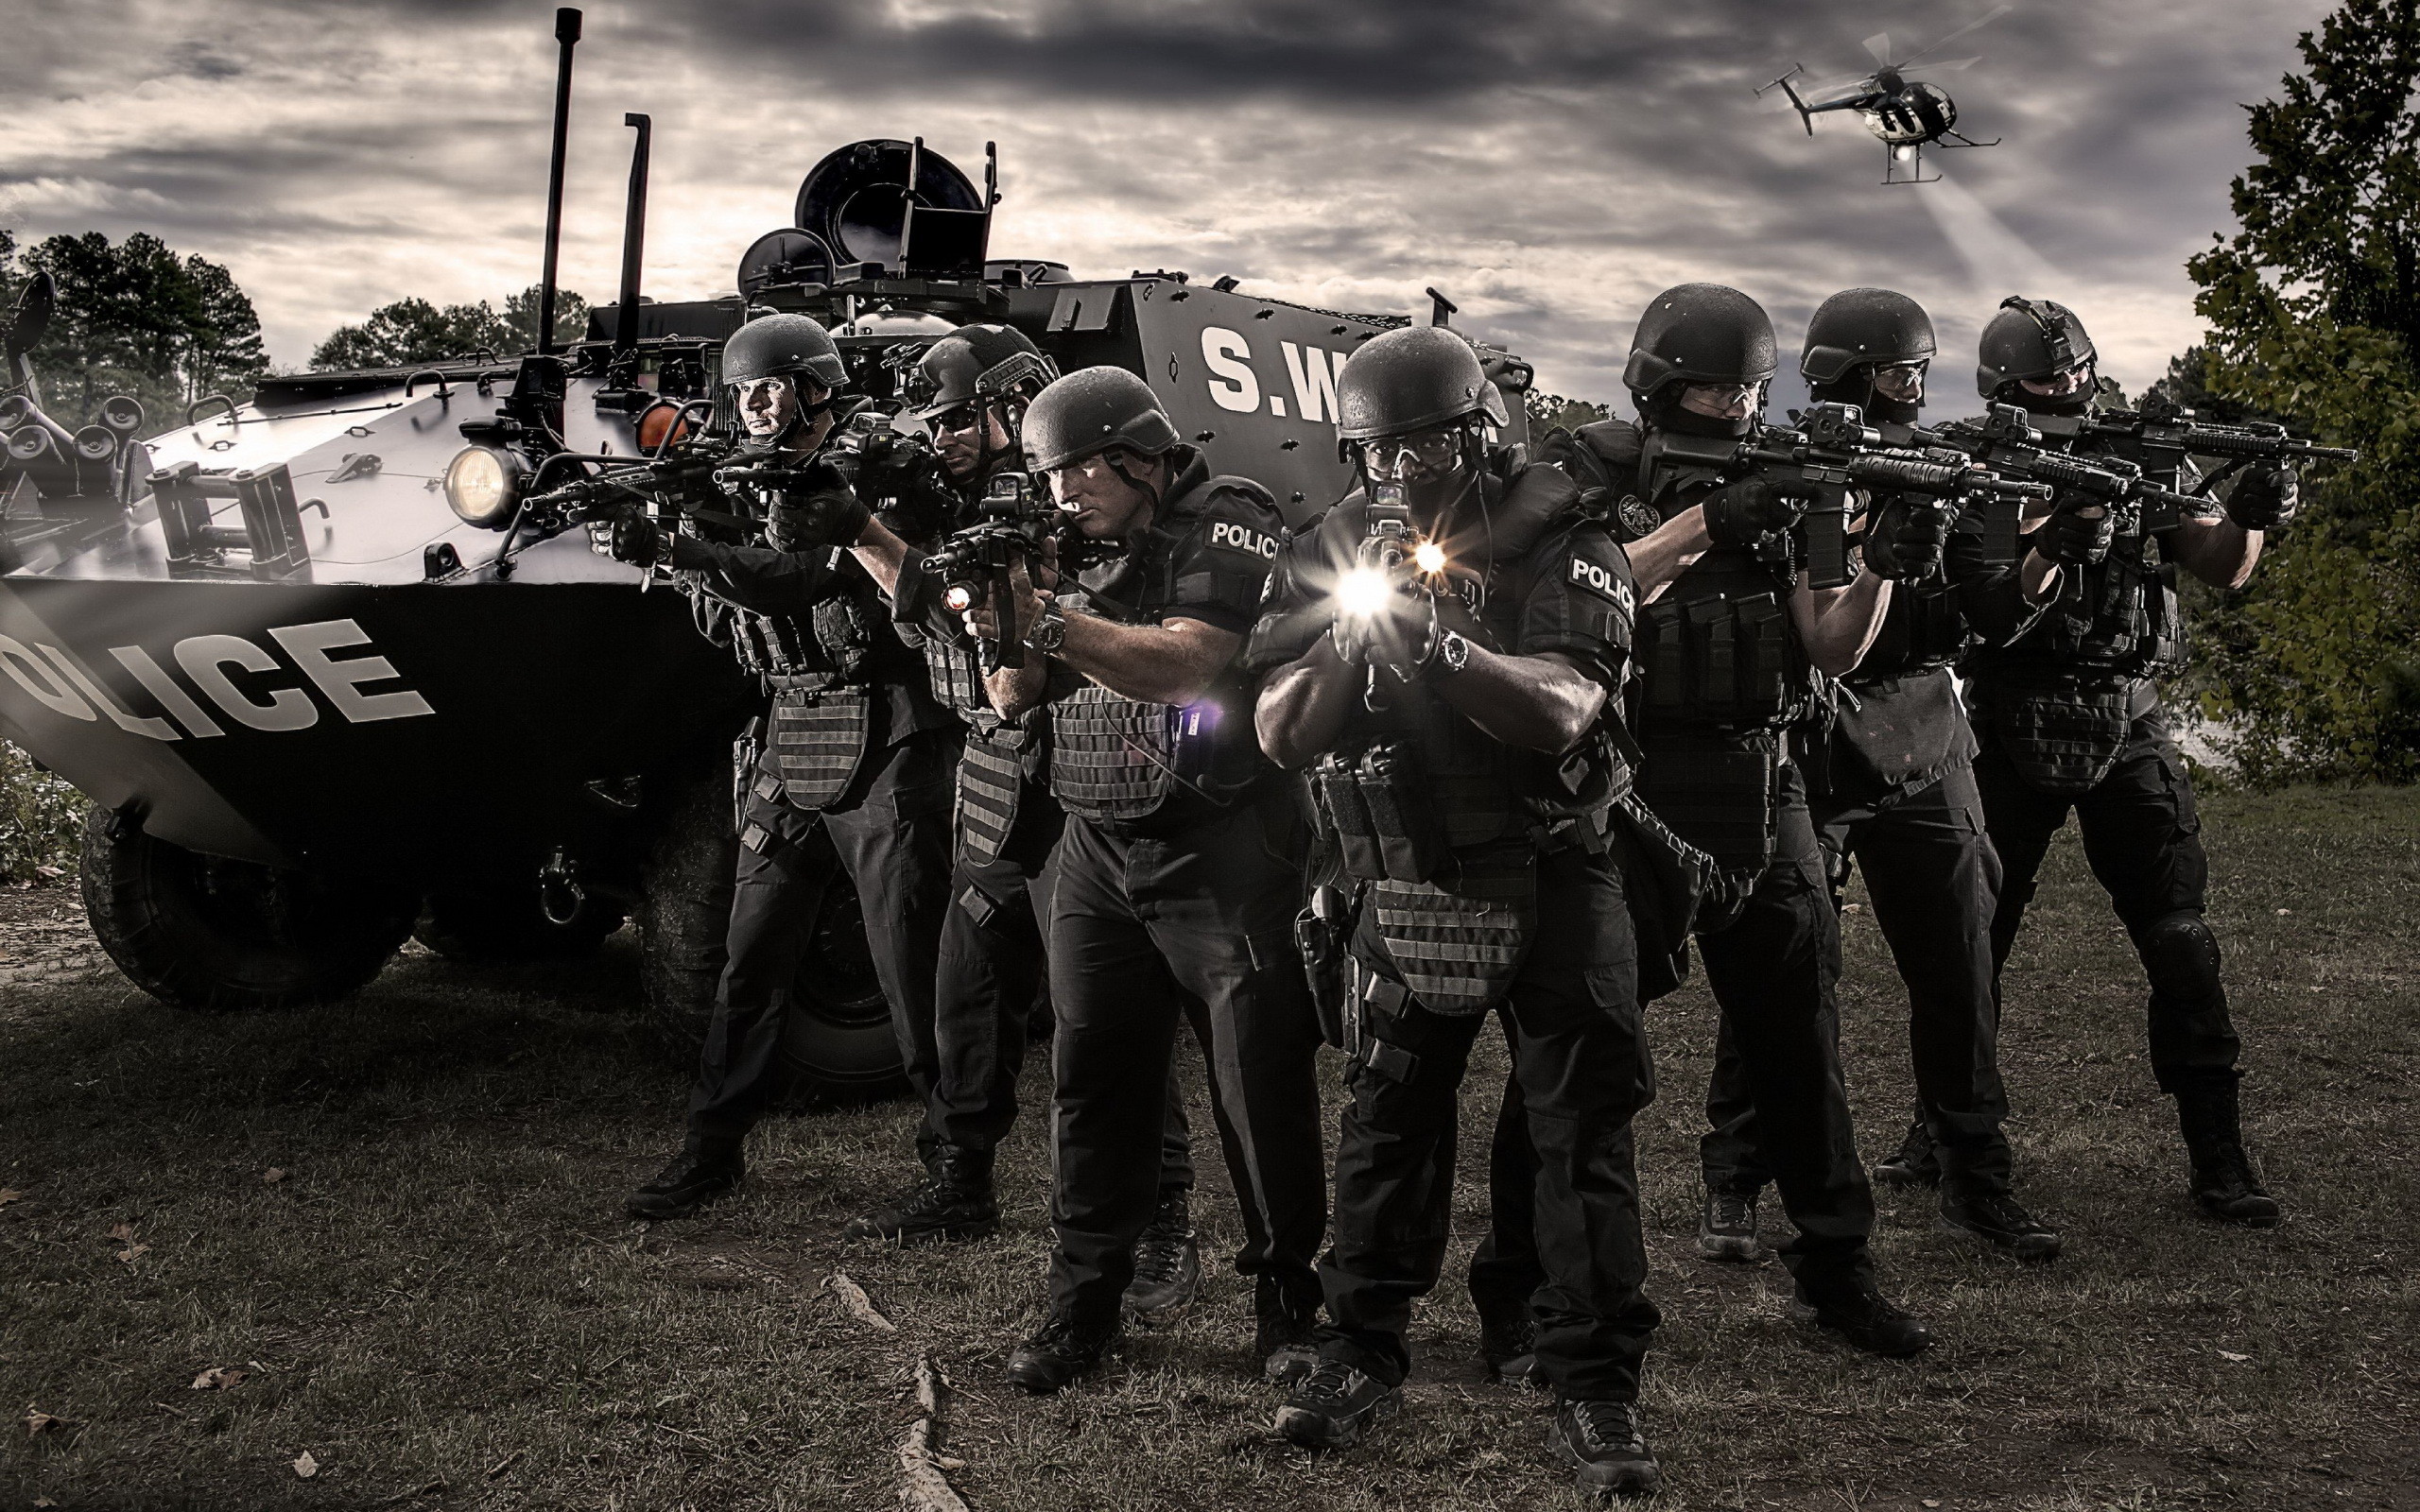 2560x1600 US Army Military Police Wallpaper - WallpaperSafari US Army Military Police  Wallpaper - WallpaperSafari ...